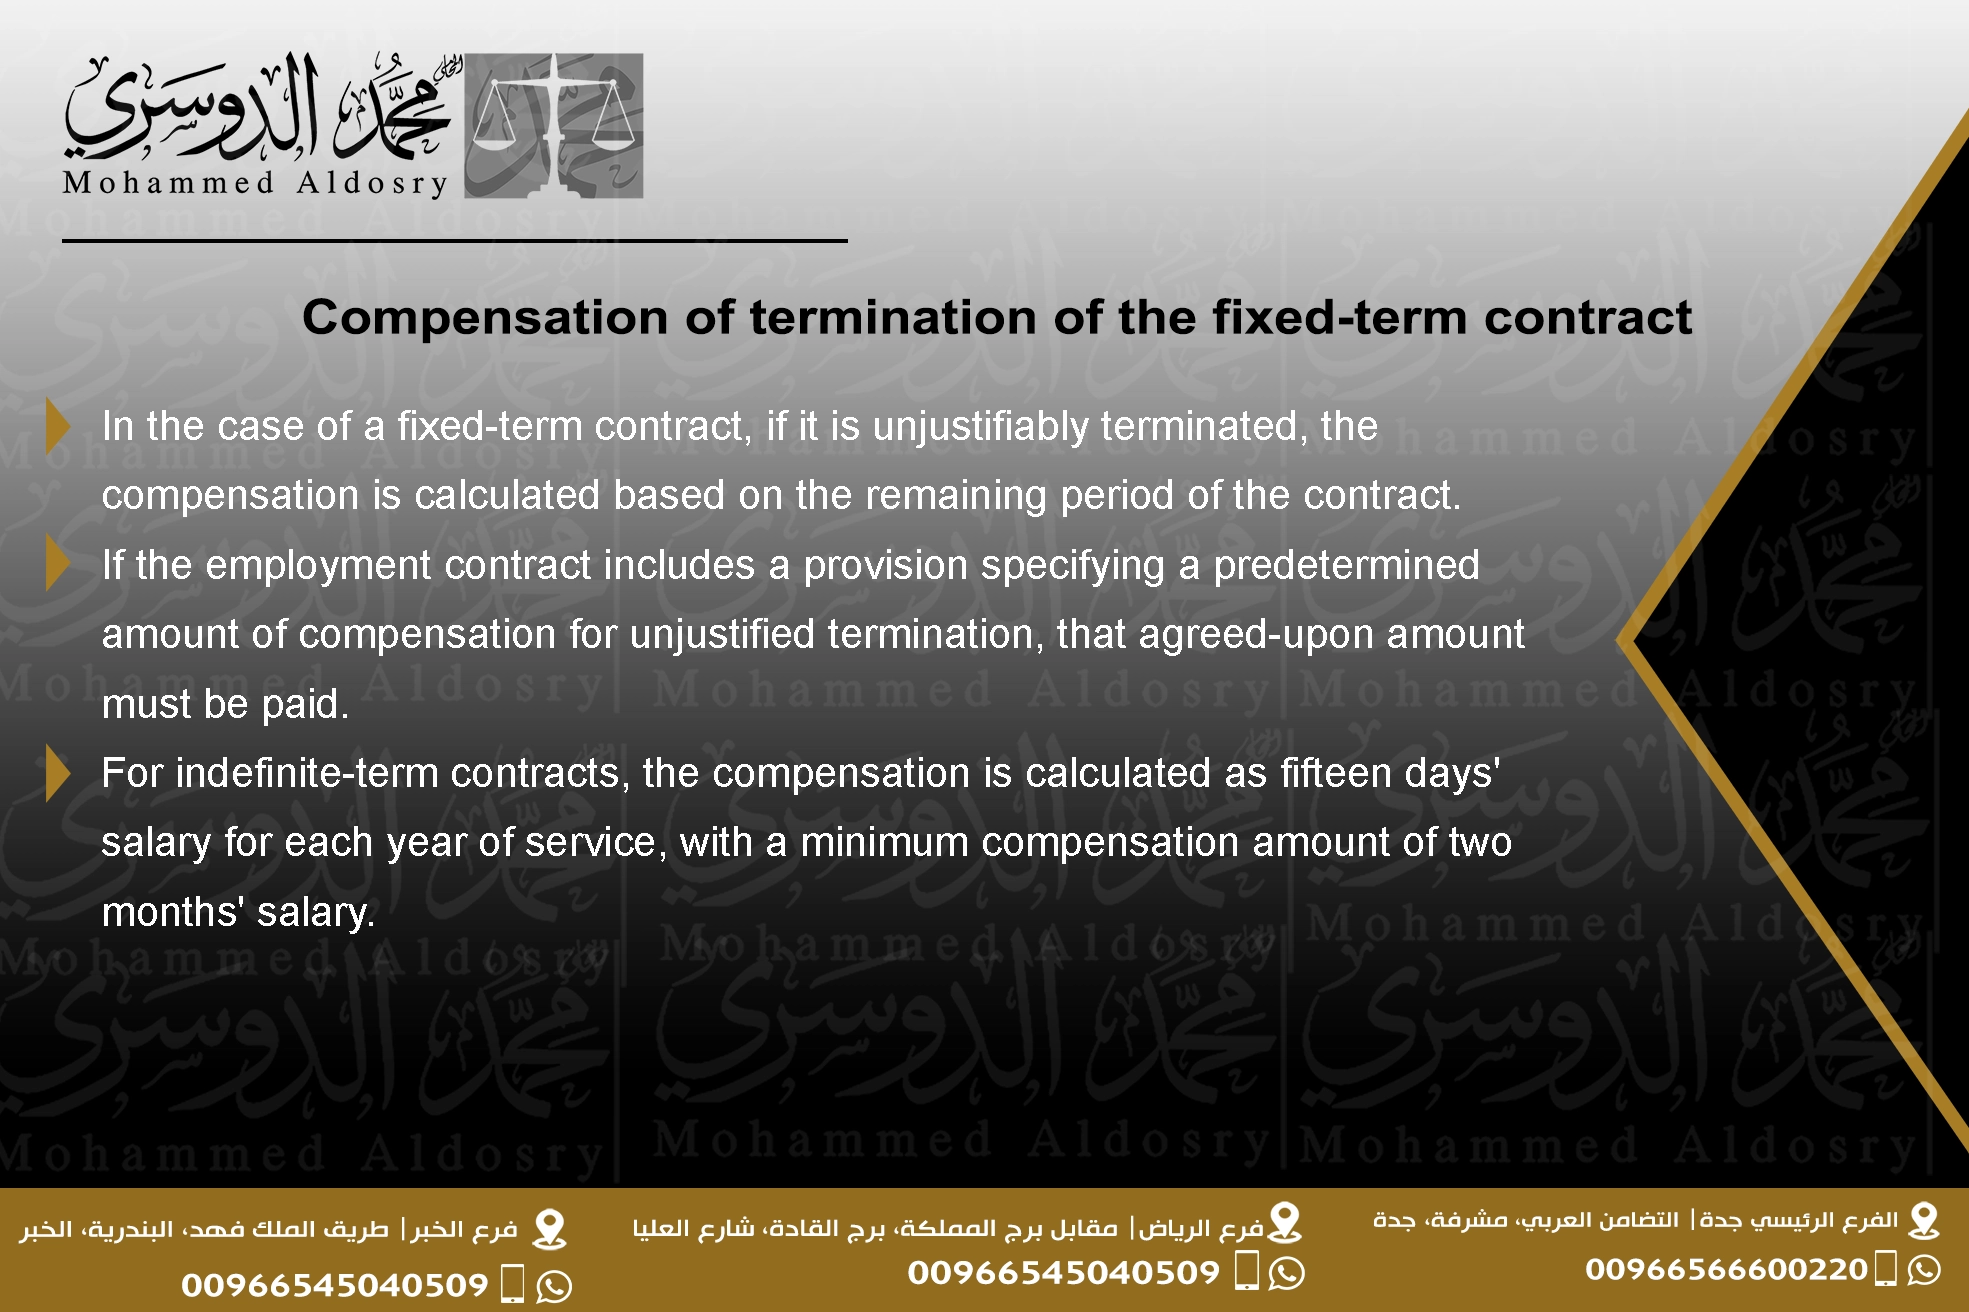 Compensation of termination of the fixed-term contract